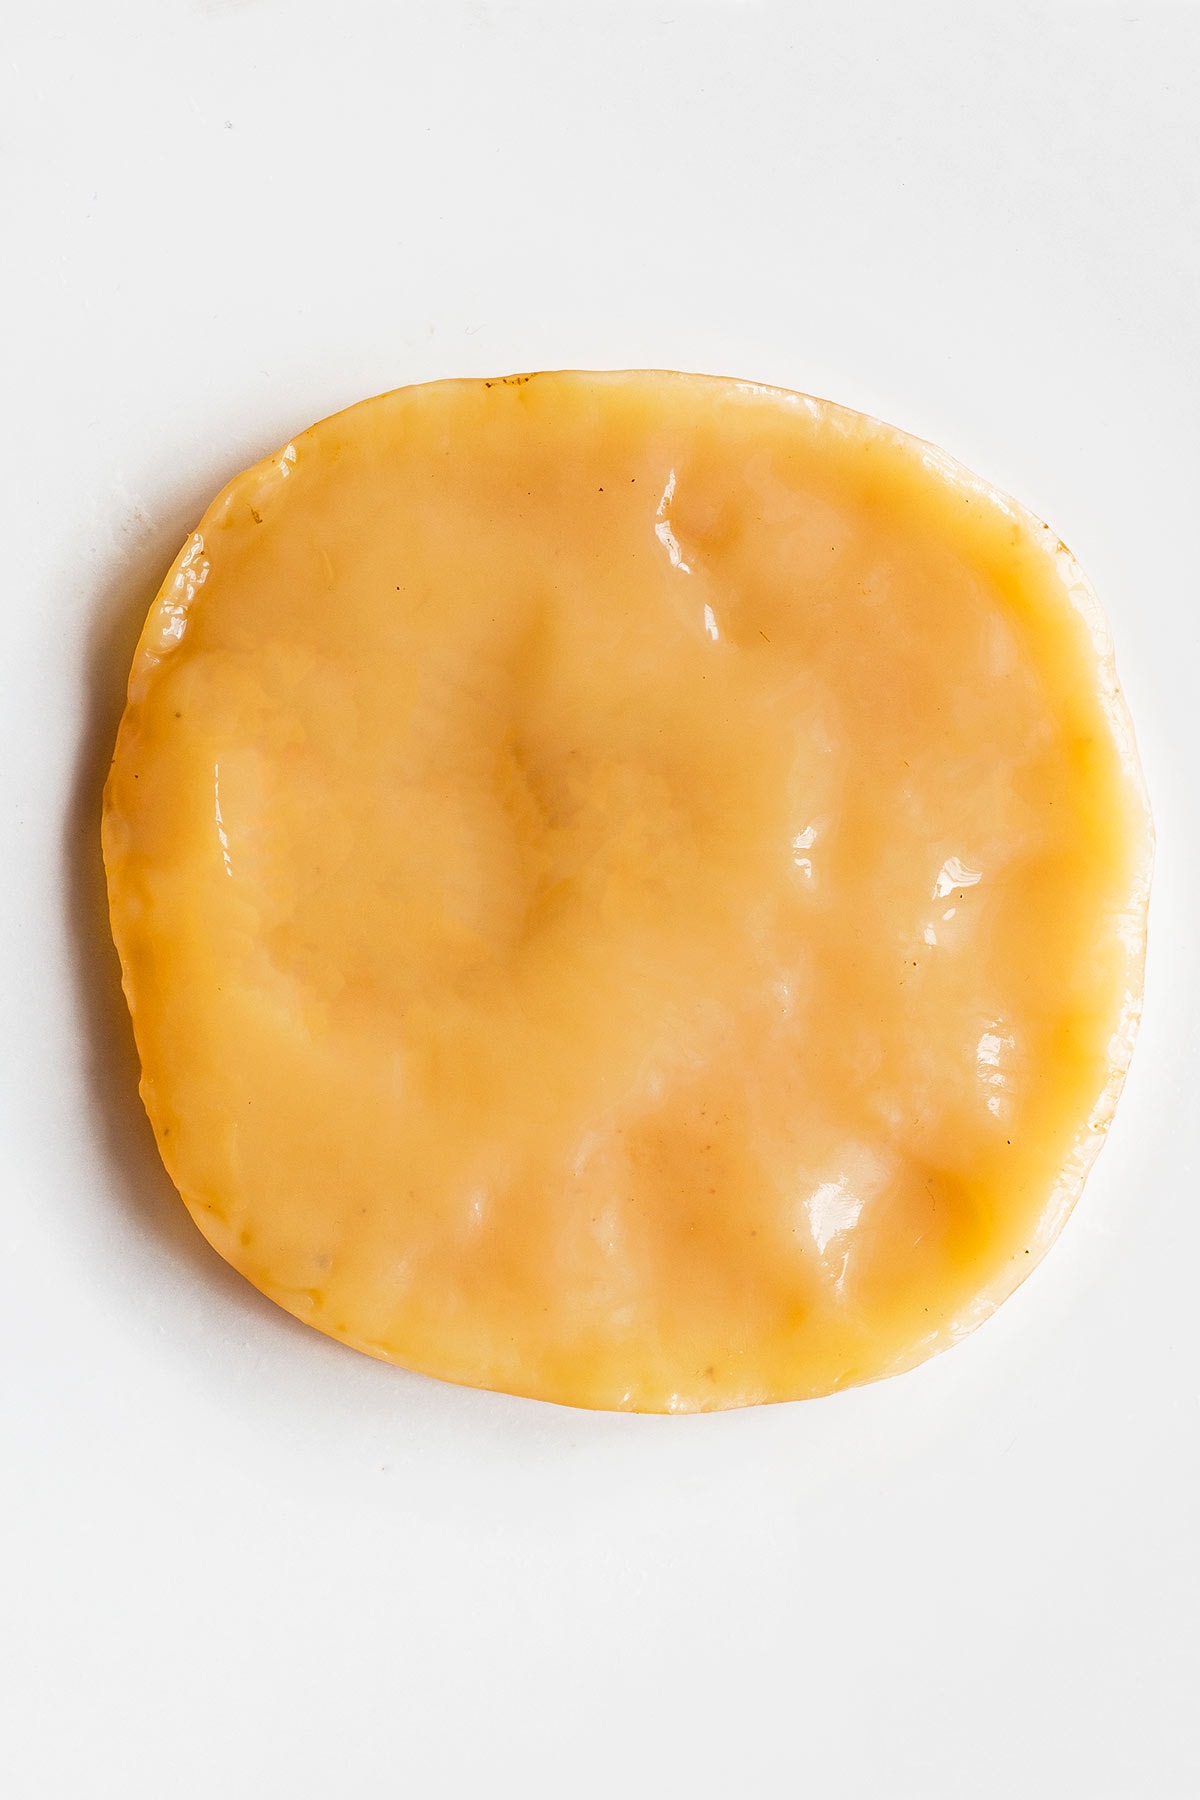 Fully grown jelly like kombucha scoby on a white plate